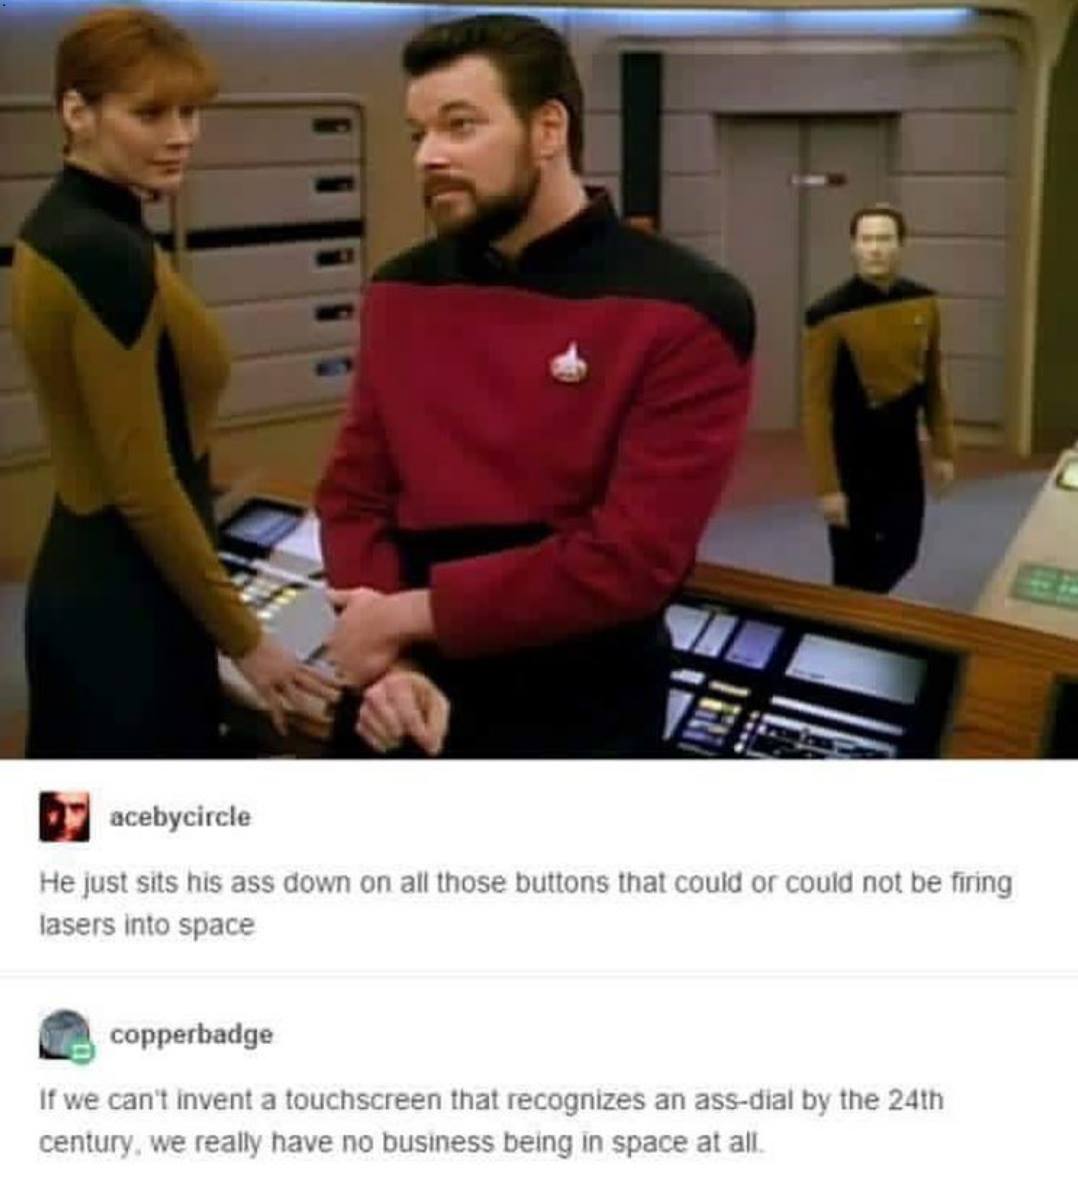 star trek text posts - b acebycircle He just sits his ass down on all those buttons that could or could not be firing lasers into space Le copperbadge If we can't invent a touchscreen that recognizes an assdial by the 24th century, we really have no busin